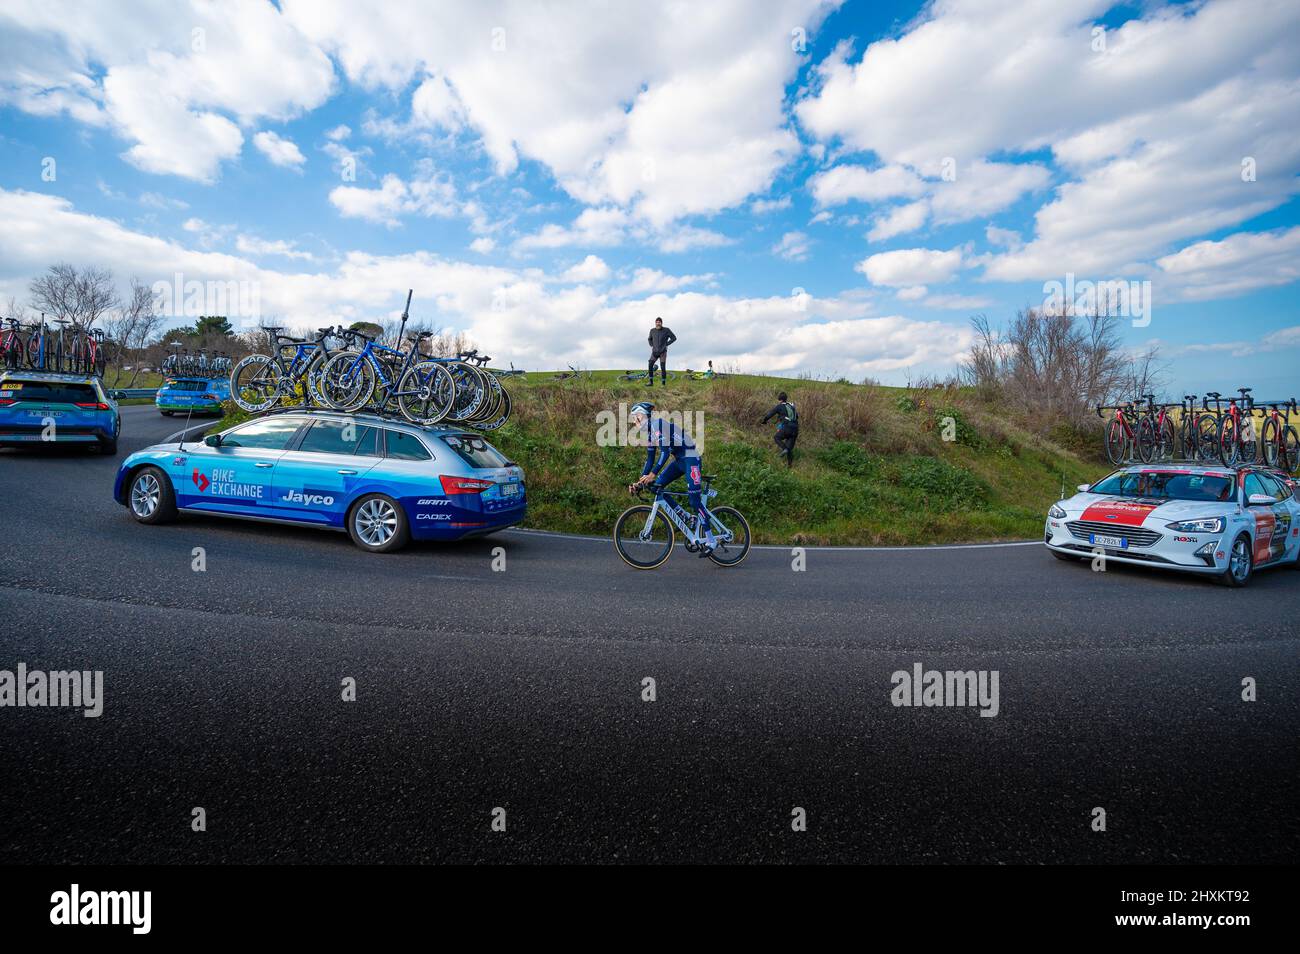 Italy, 12 March 2022 - professional cyclists travel an uphill road during the Tirreno Adriatico stage during the Apecchio - Carpegna stage in the Marc Stock Photo